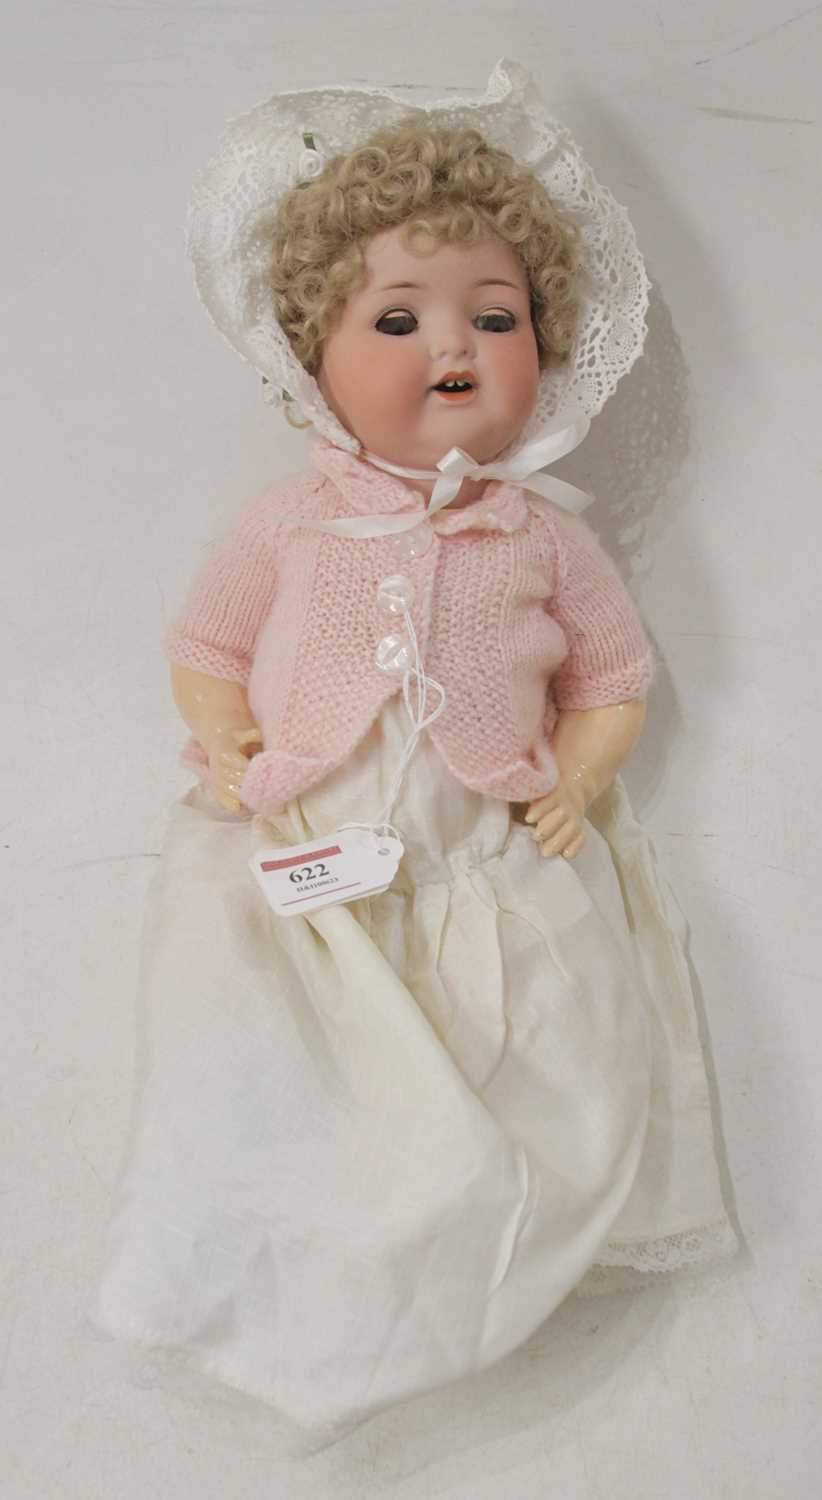 An early 20th century Armand Marseilles bisque head doll, having painted brows and blue rolling